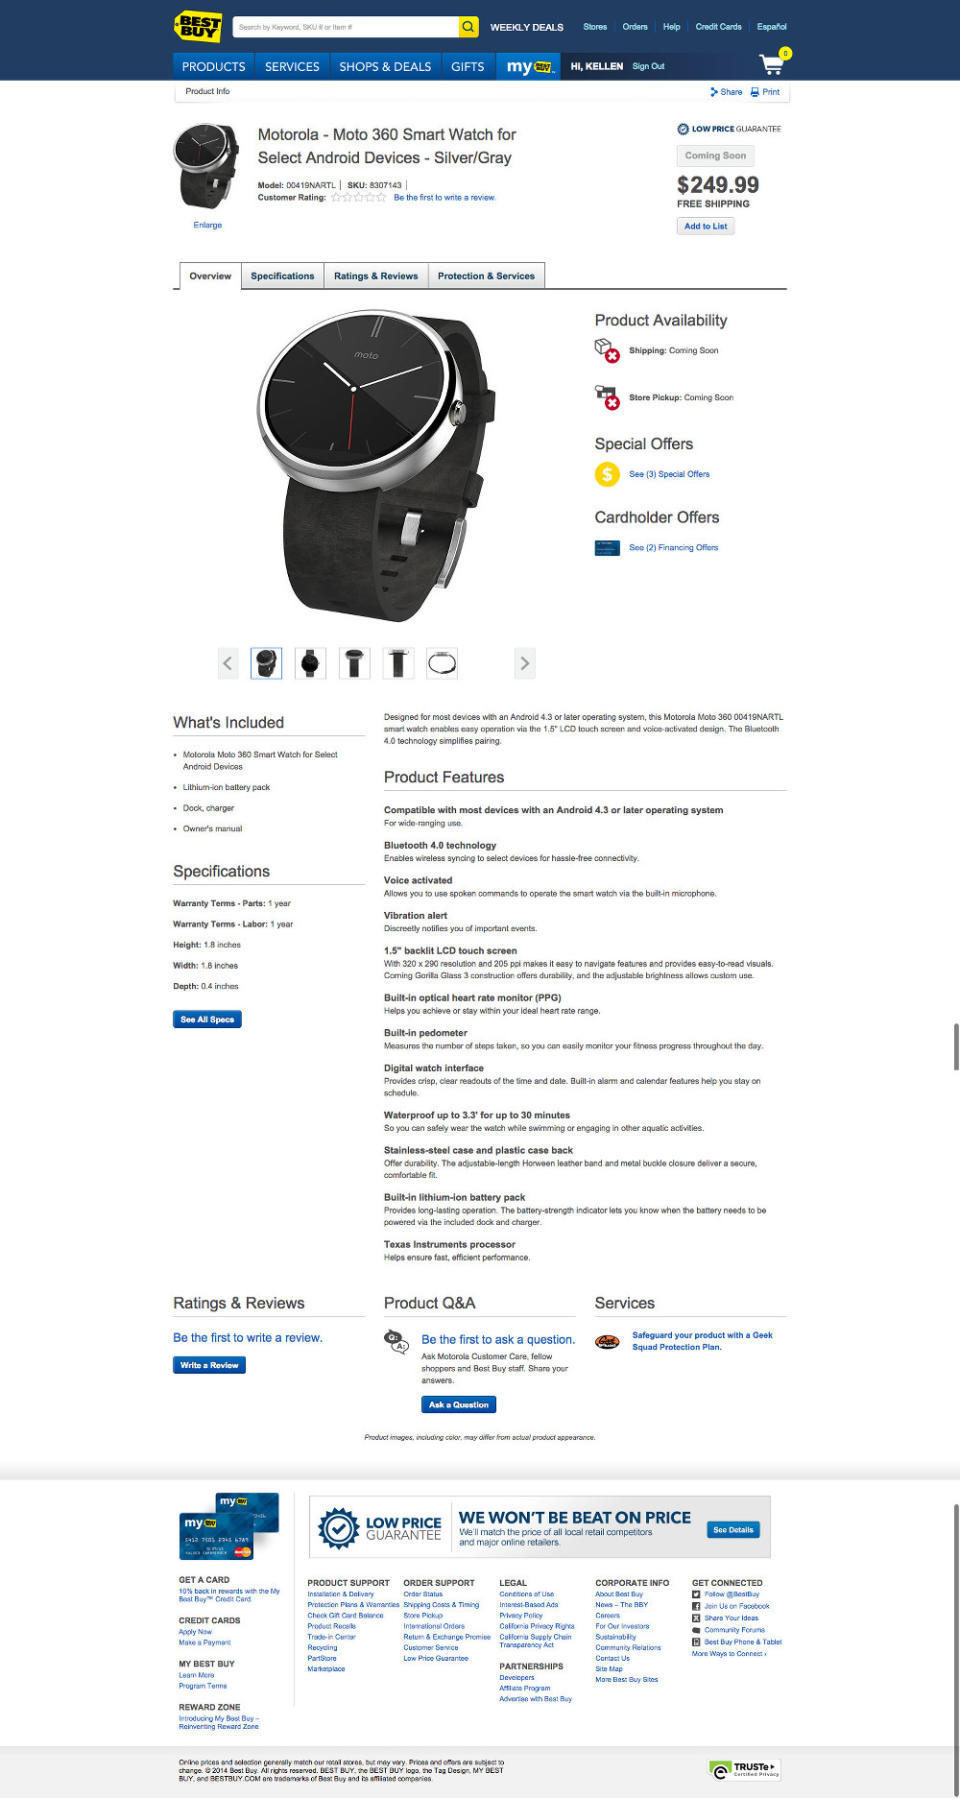 Best Buy reveals everything there is to know about the gorgeous Moto 360